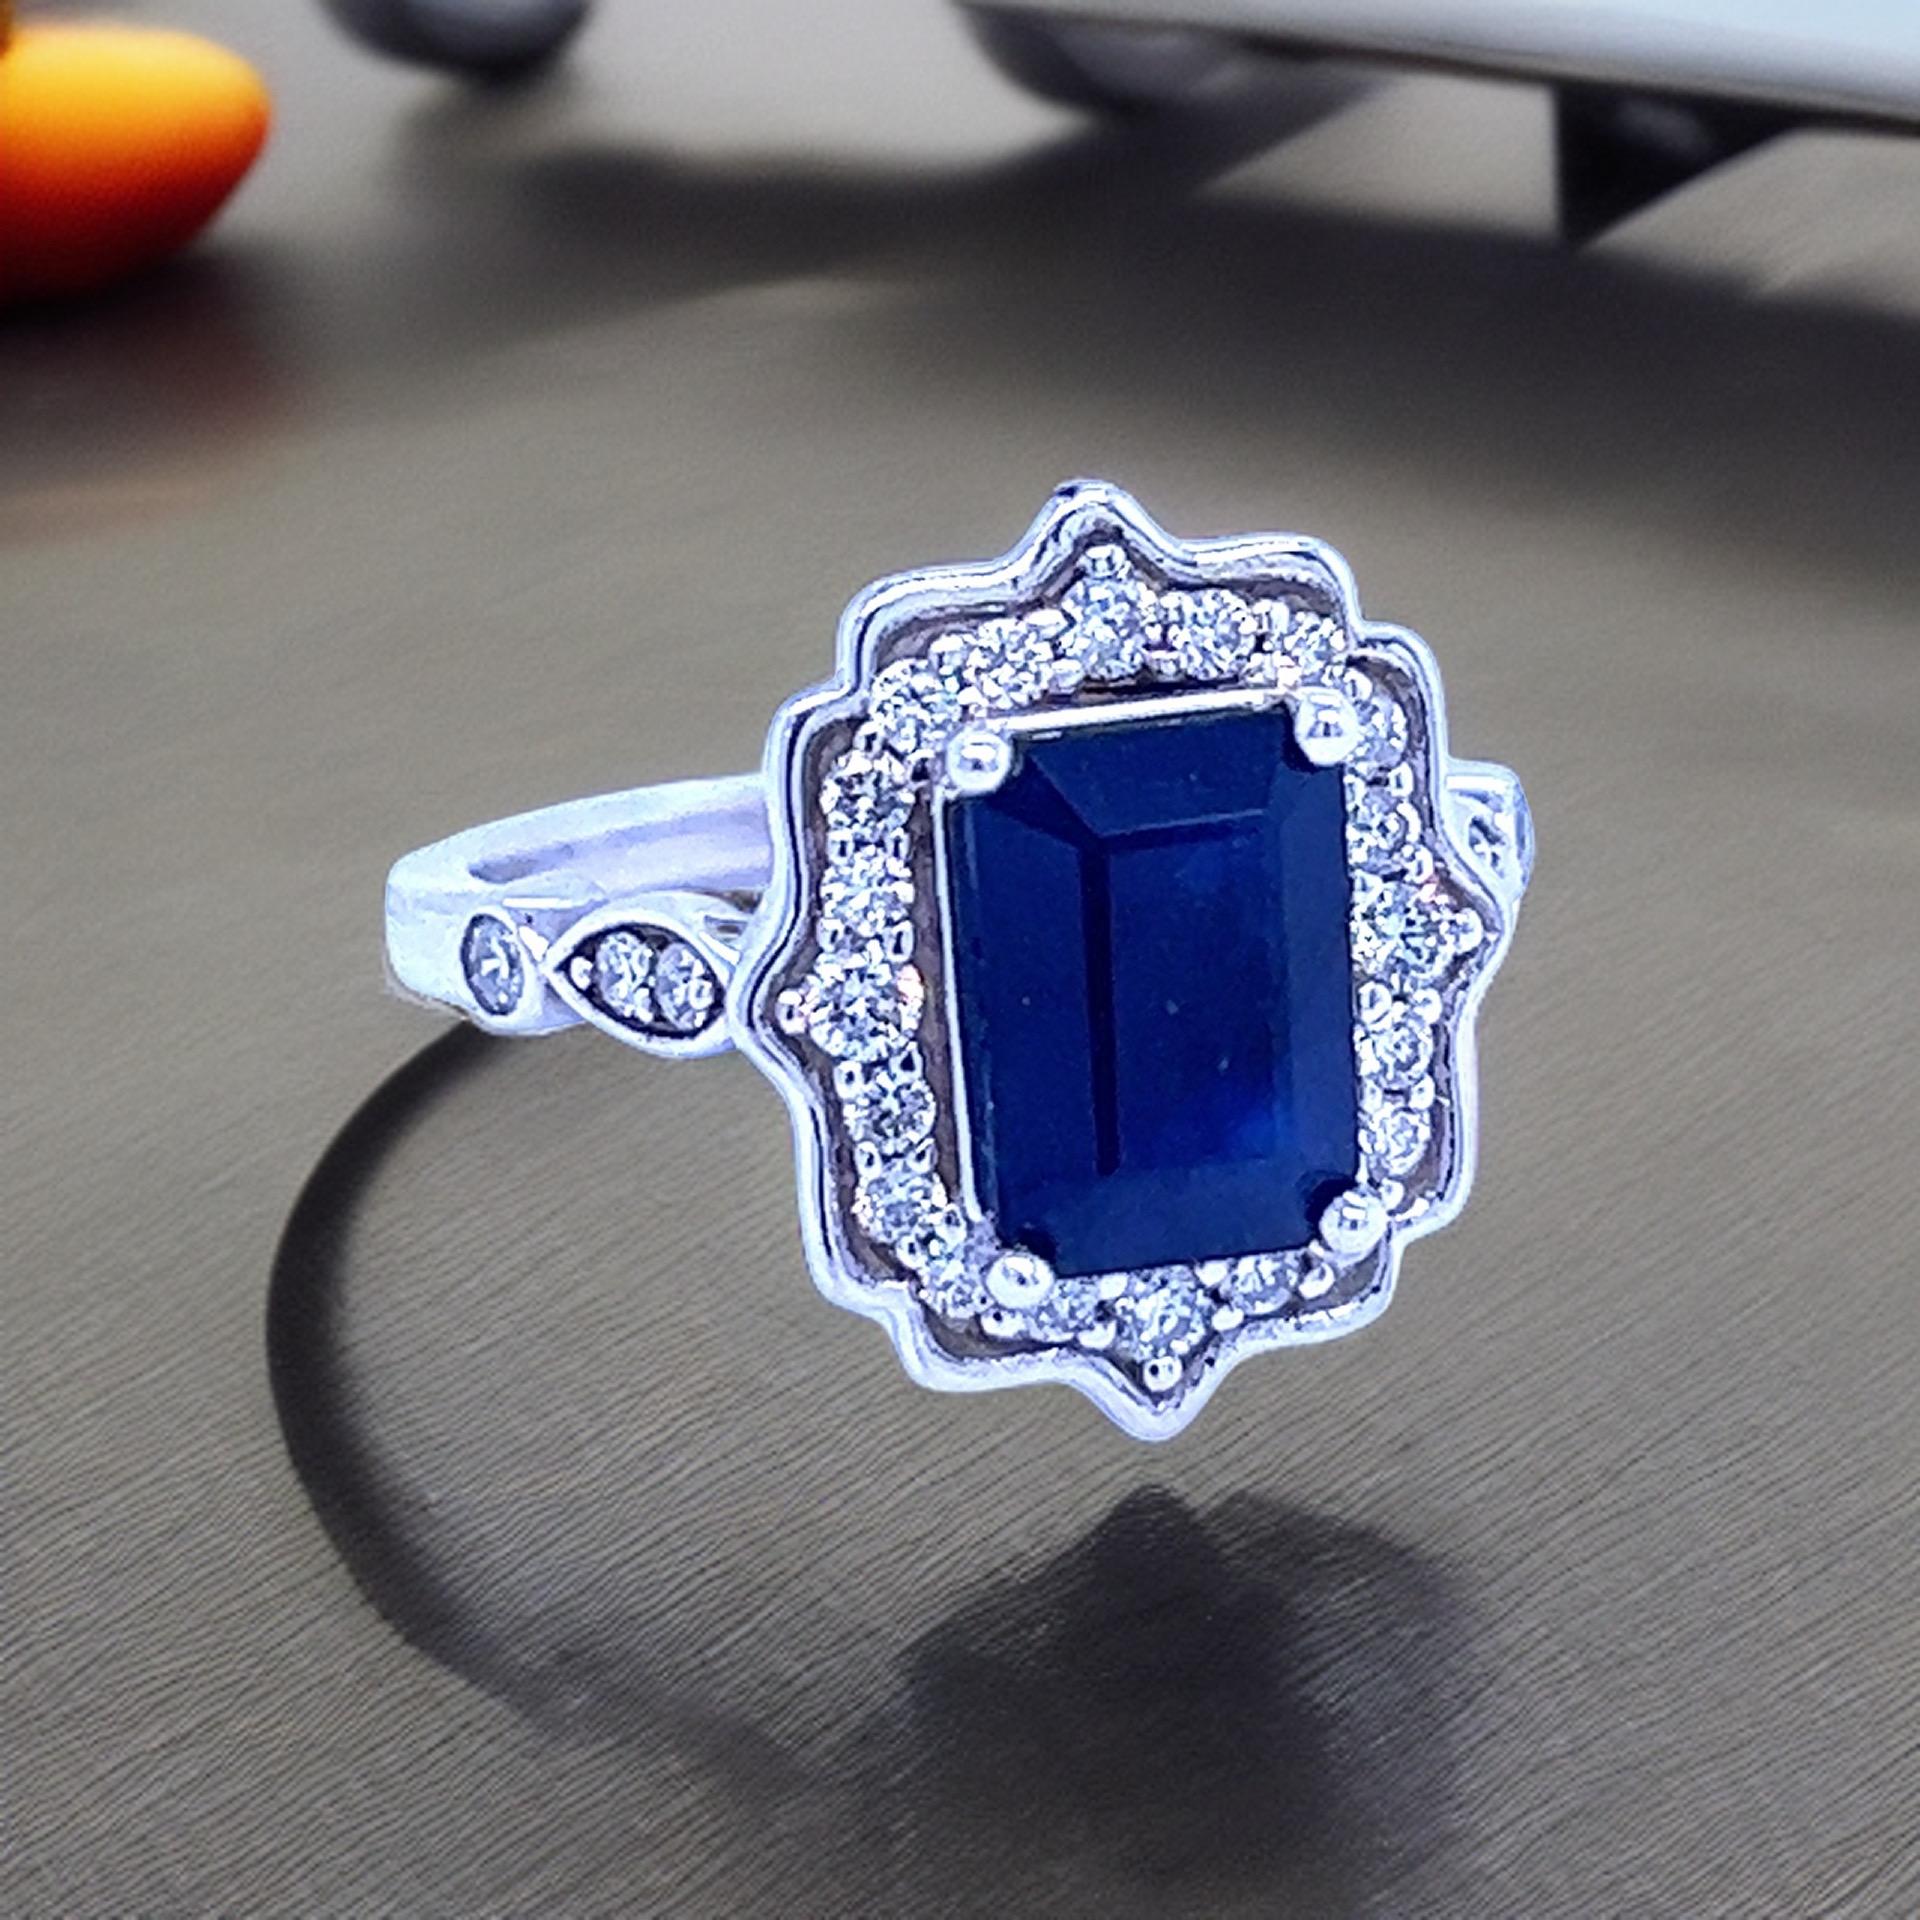 Natural Sapphire Diamond Ring 6.5 14k White Gold 3.51 TCW Certified For Sale 1